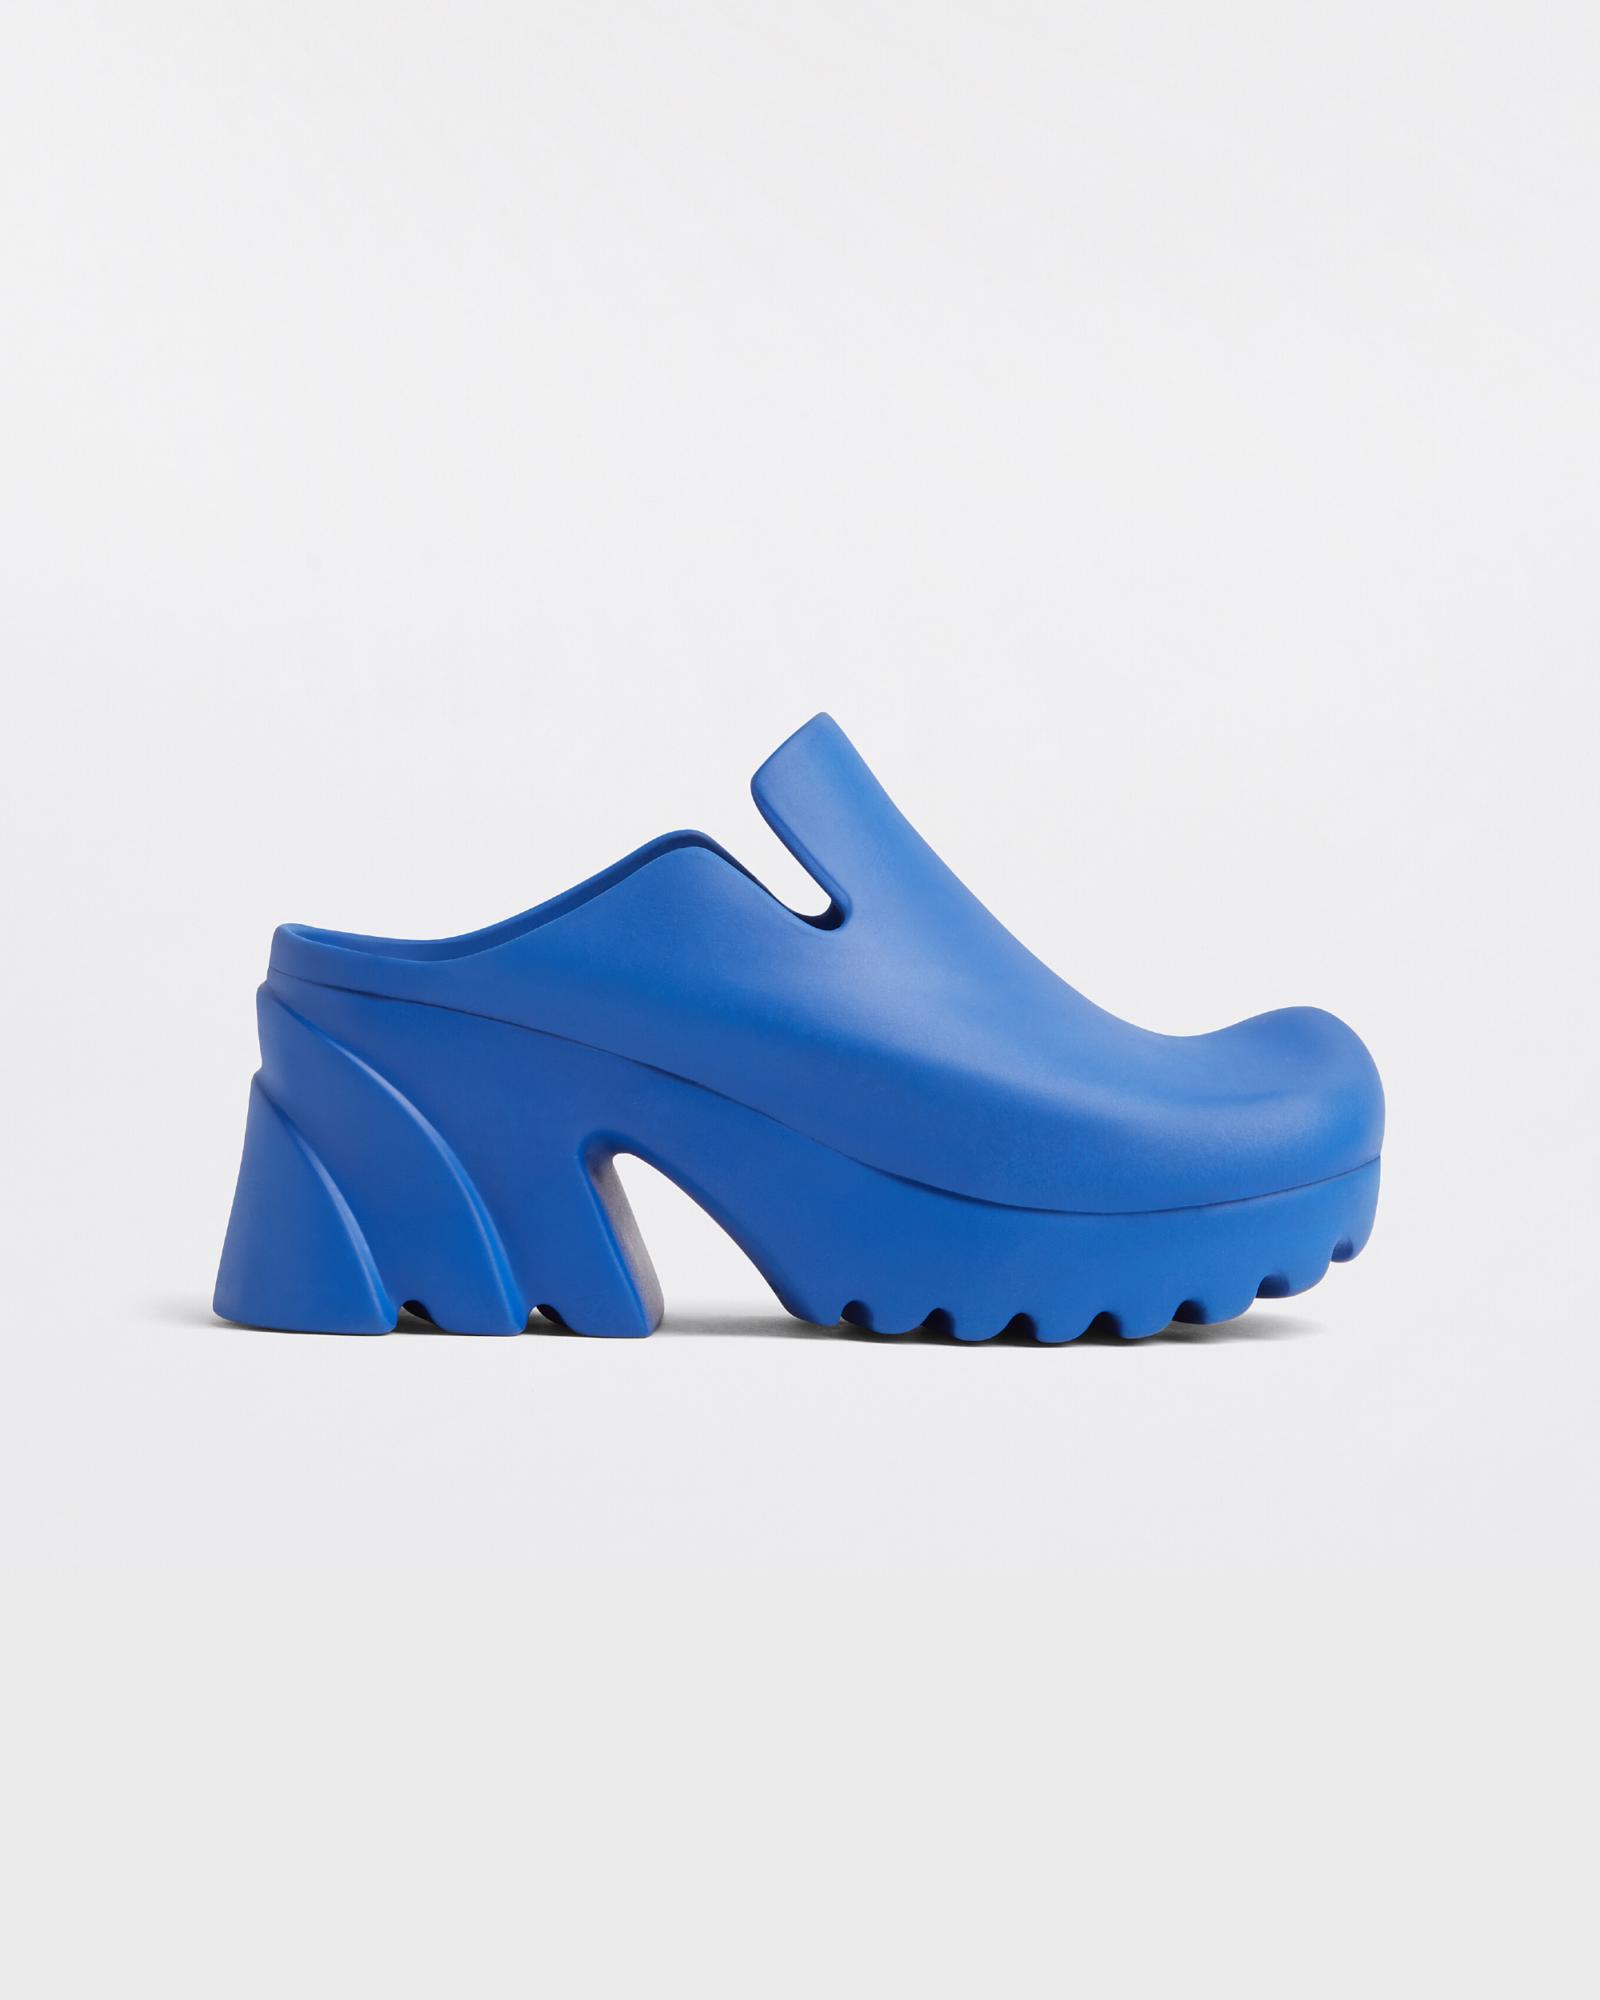 Clogs Trend: Here are 21 Clog Styles to Shop in 2022 - FASHION Magazine